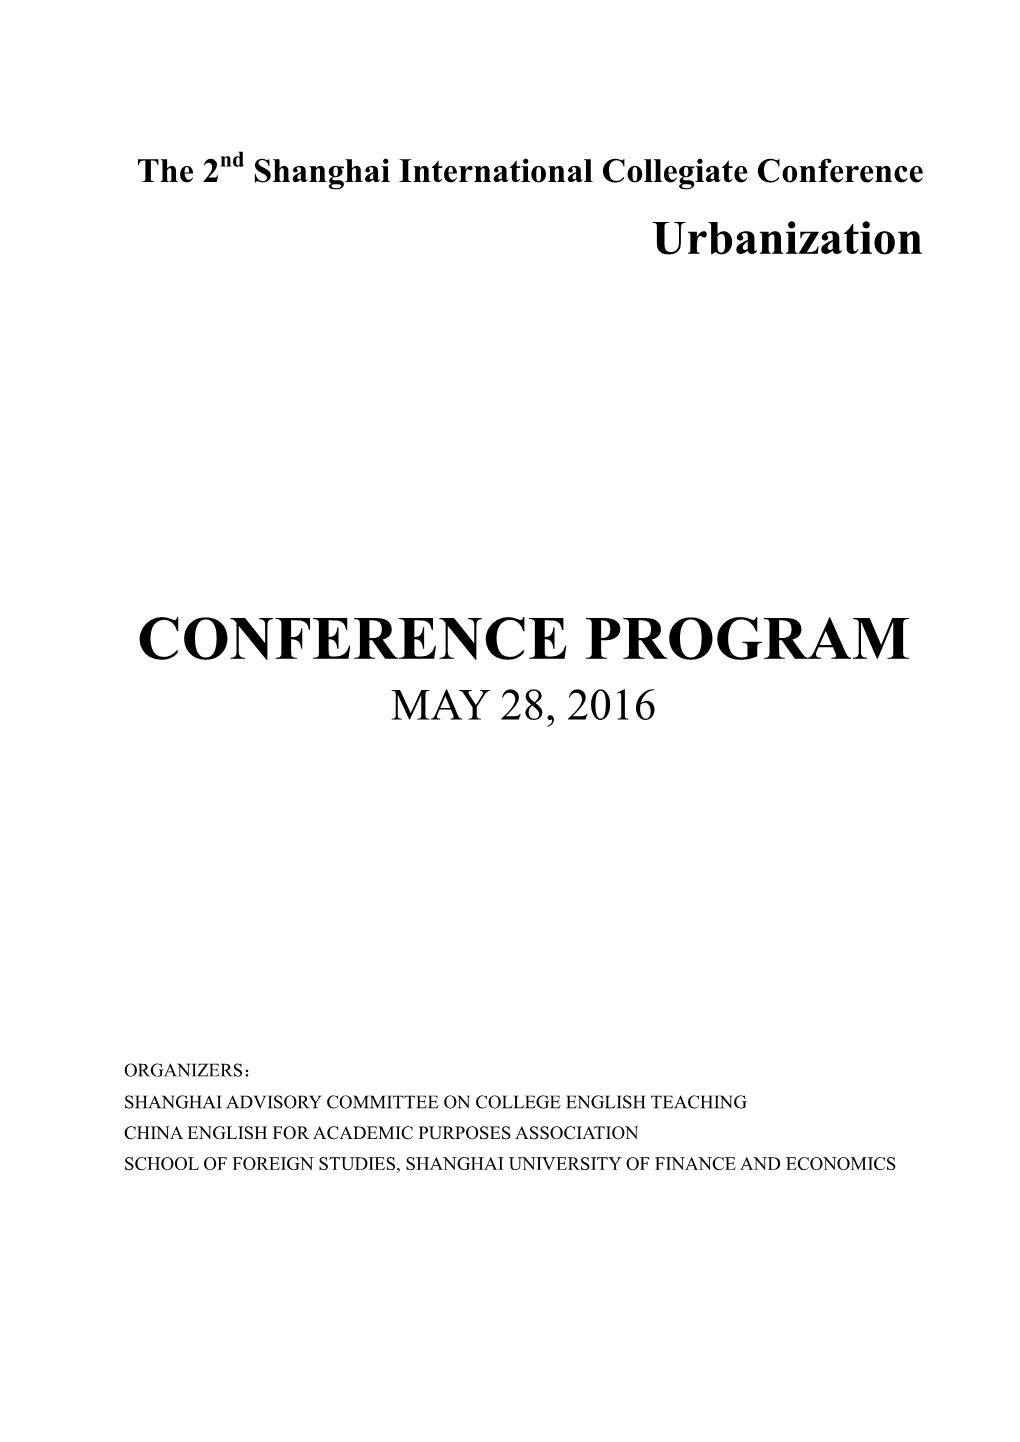 Conference Program May 28, 2016